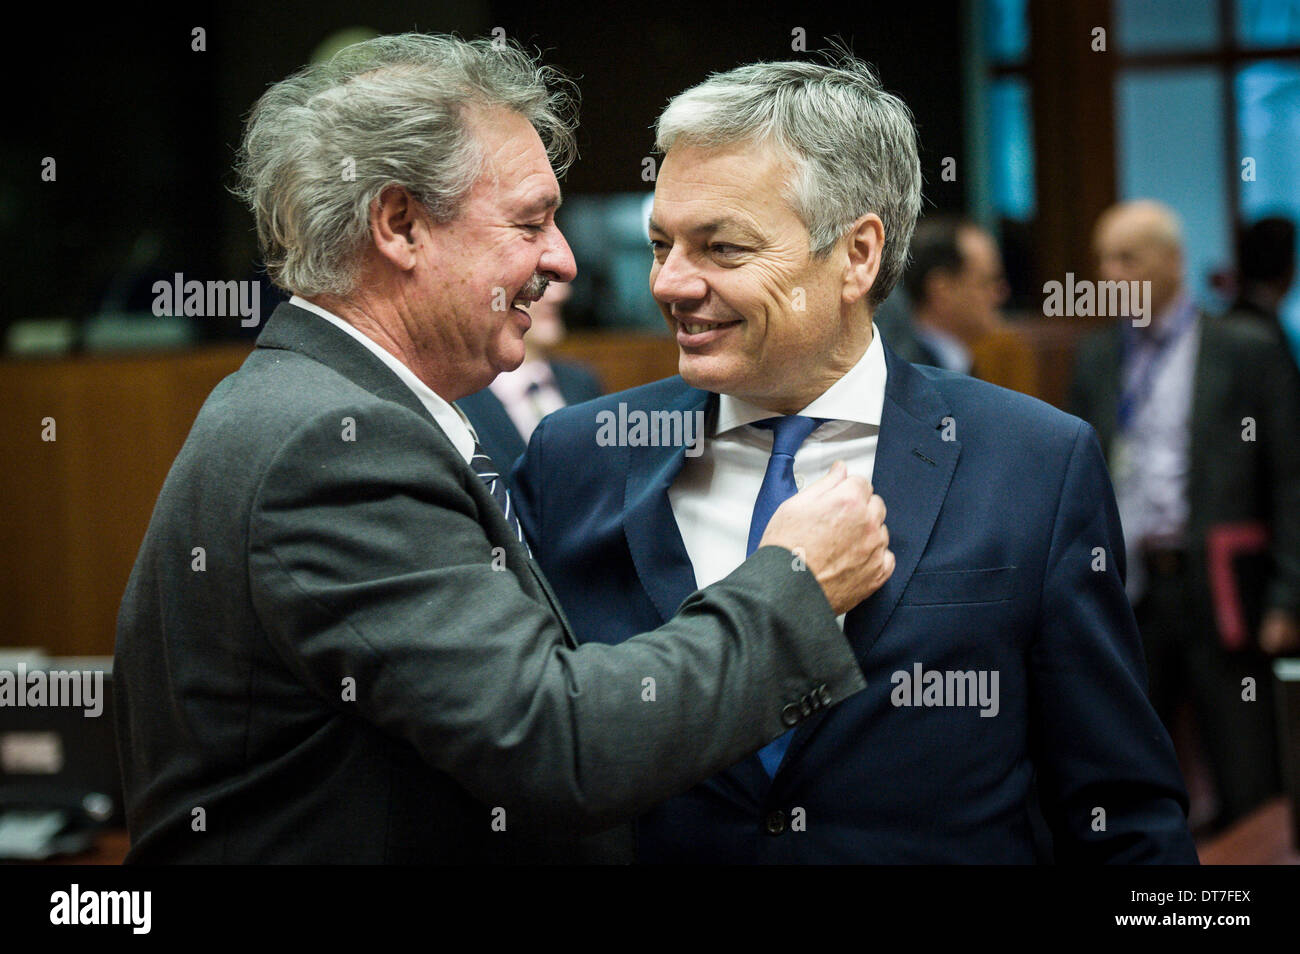 Luxembourg's Foreign Minister Jean Asselborn (L) and Belgian Foreign Minister Didier Reynders during General Affair Council European Affairs ministers meeting at European Council headquarters in Brussels, Belgium on 11.02.2014 Ministers take a decision on the authorisation of the placing of the market for cultivation purposes of the genetically modified maize 1507. The Council established also an EU military operation to contribute to a secure environment in the Central African Republic, as authorised by the UN Security Council in resolution 2134. by Wiktor Dabkowski Stock Photo